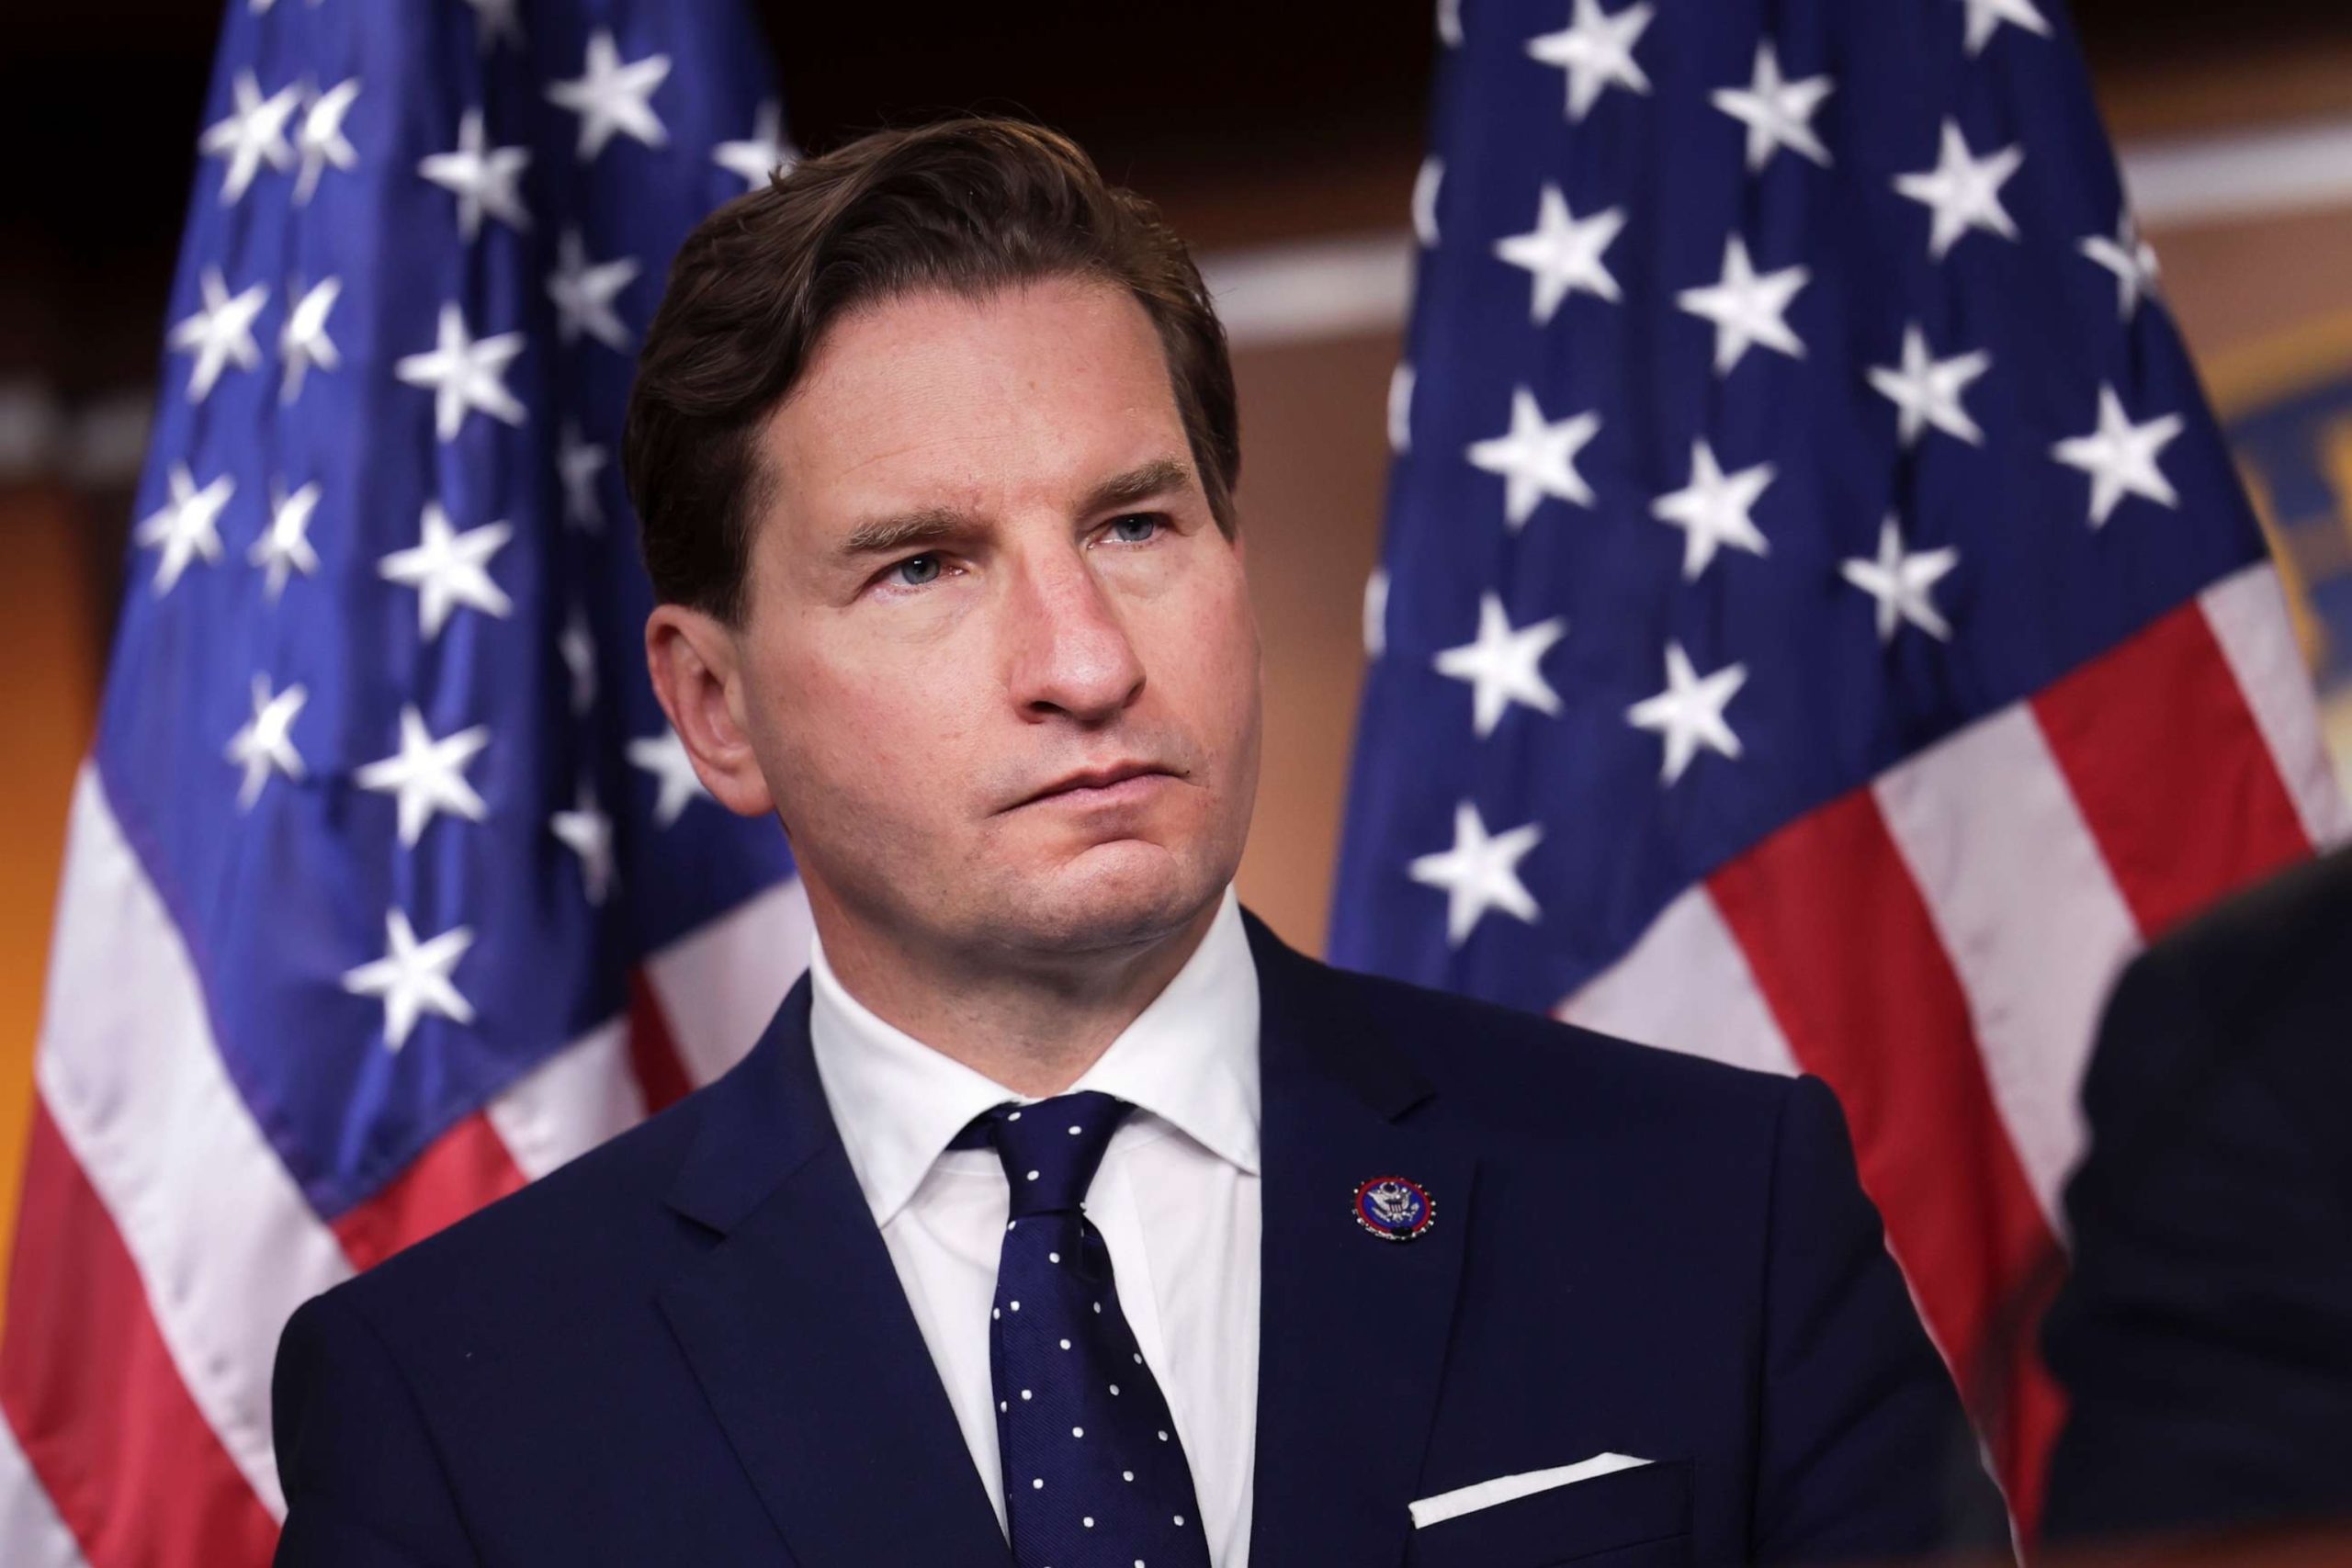 Democratic Representative Dean Phillips announces his candidacy for the 2024 White House race, presenting a challenge to President Biden.